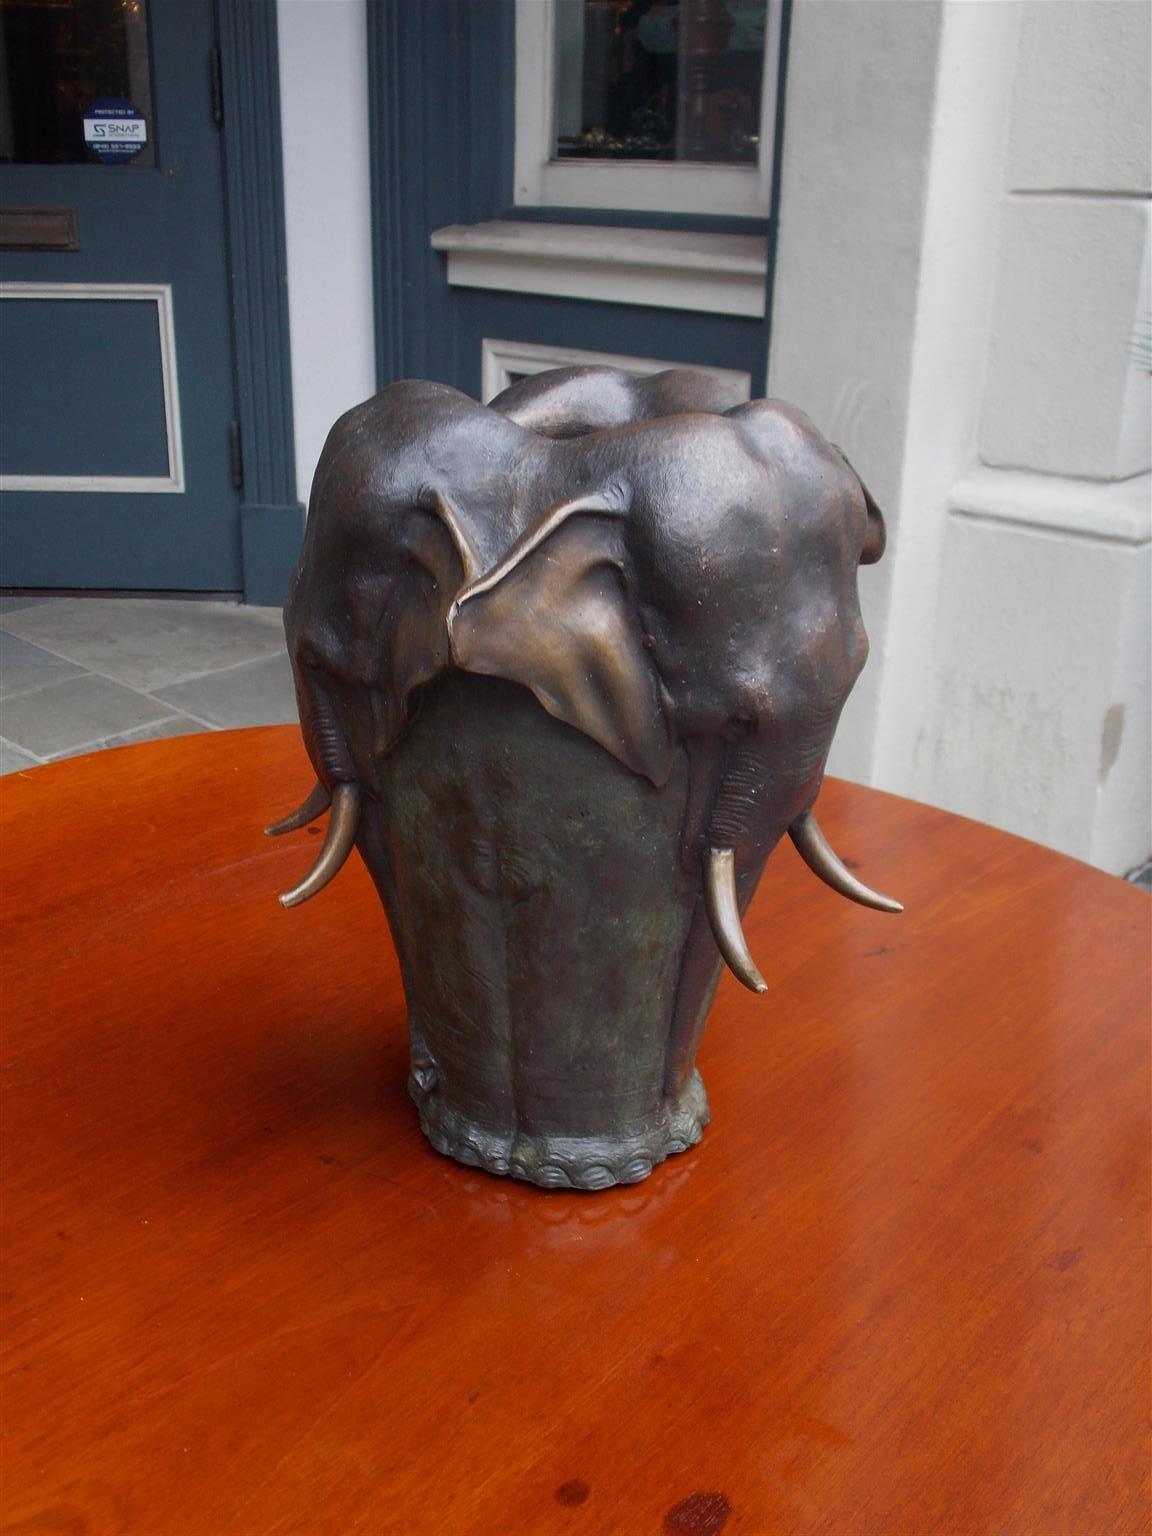 French heavy cast figural bronze elephant vase after Antoine-Louis Barye, Signed A. Barye, Late 19th Century. Approximately 25lbs in weight.